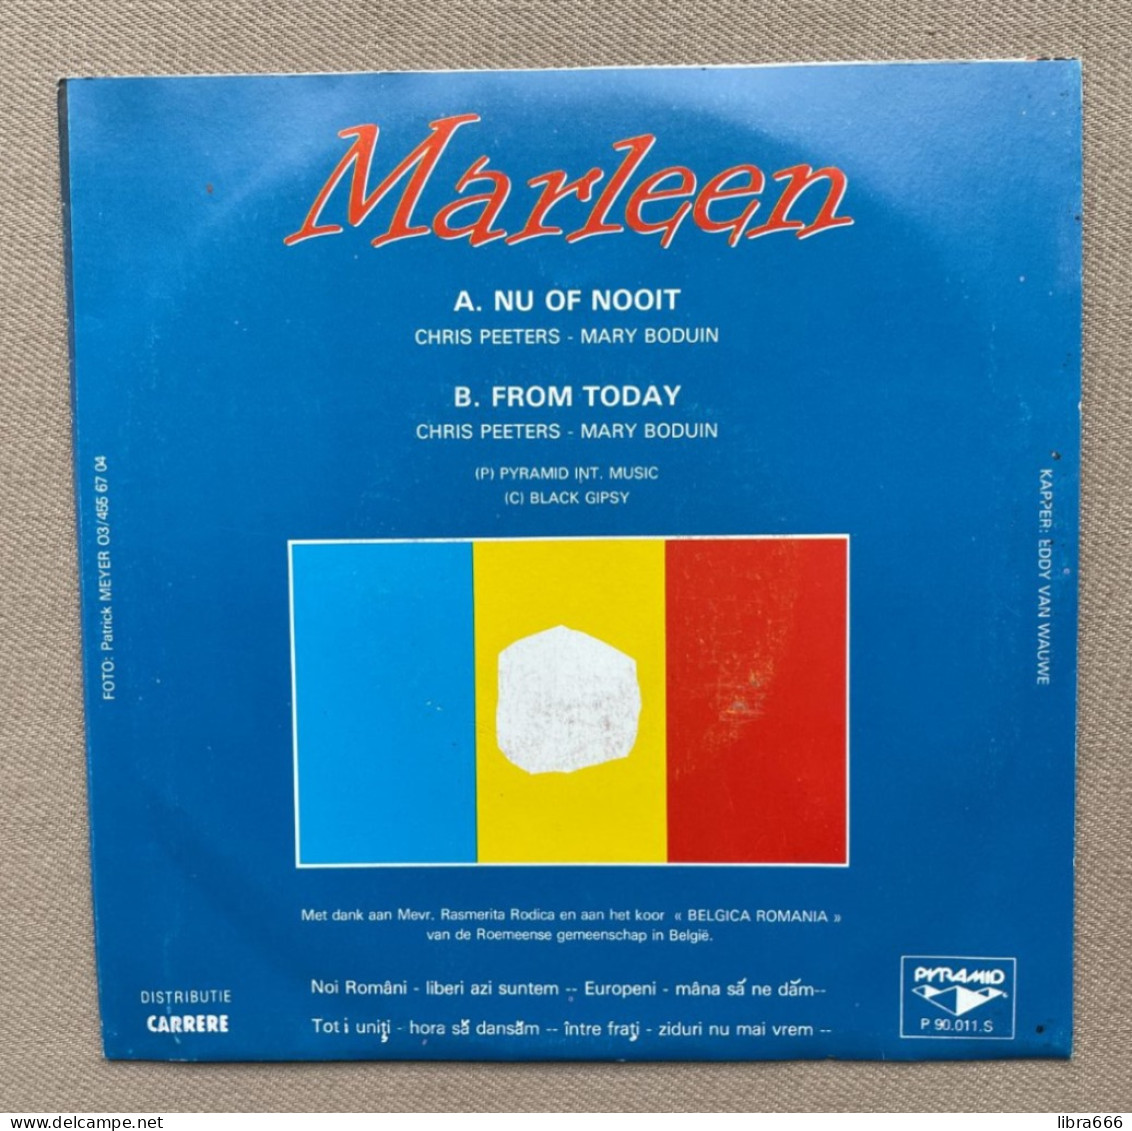 MARLEEN  - A. Nu Of Nooit B. From Today - 1990 - Pyramid Records -  P.90.011.S - Other - Dutch Music